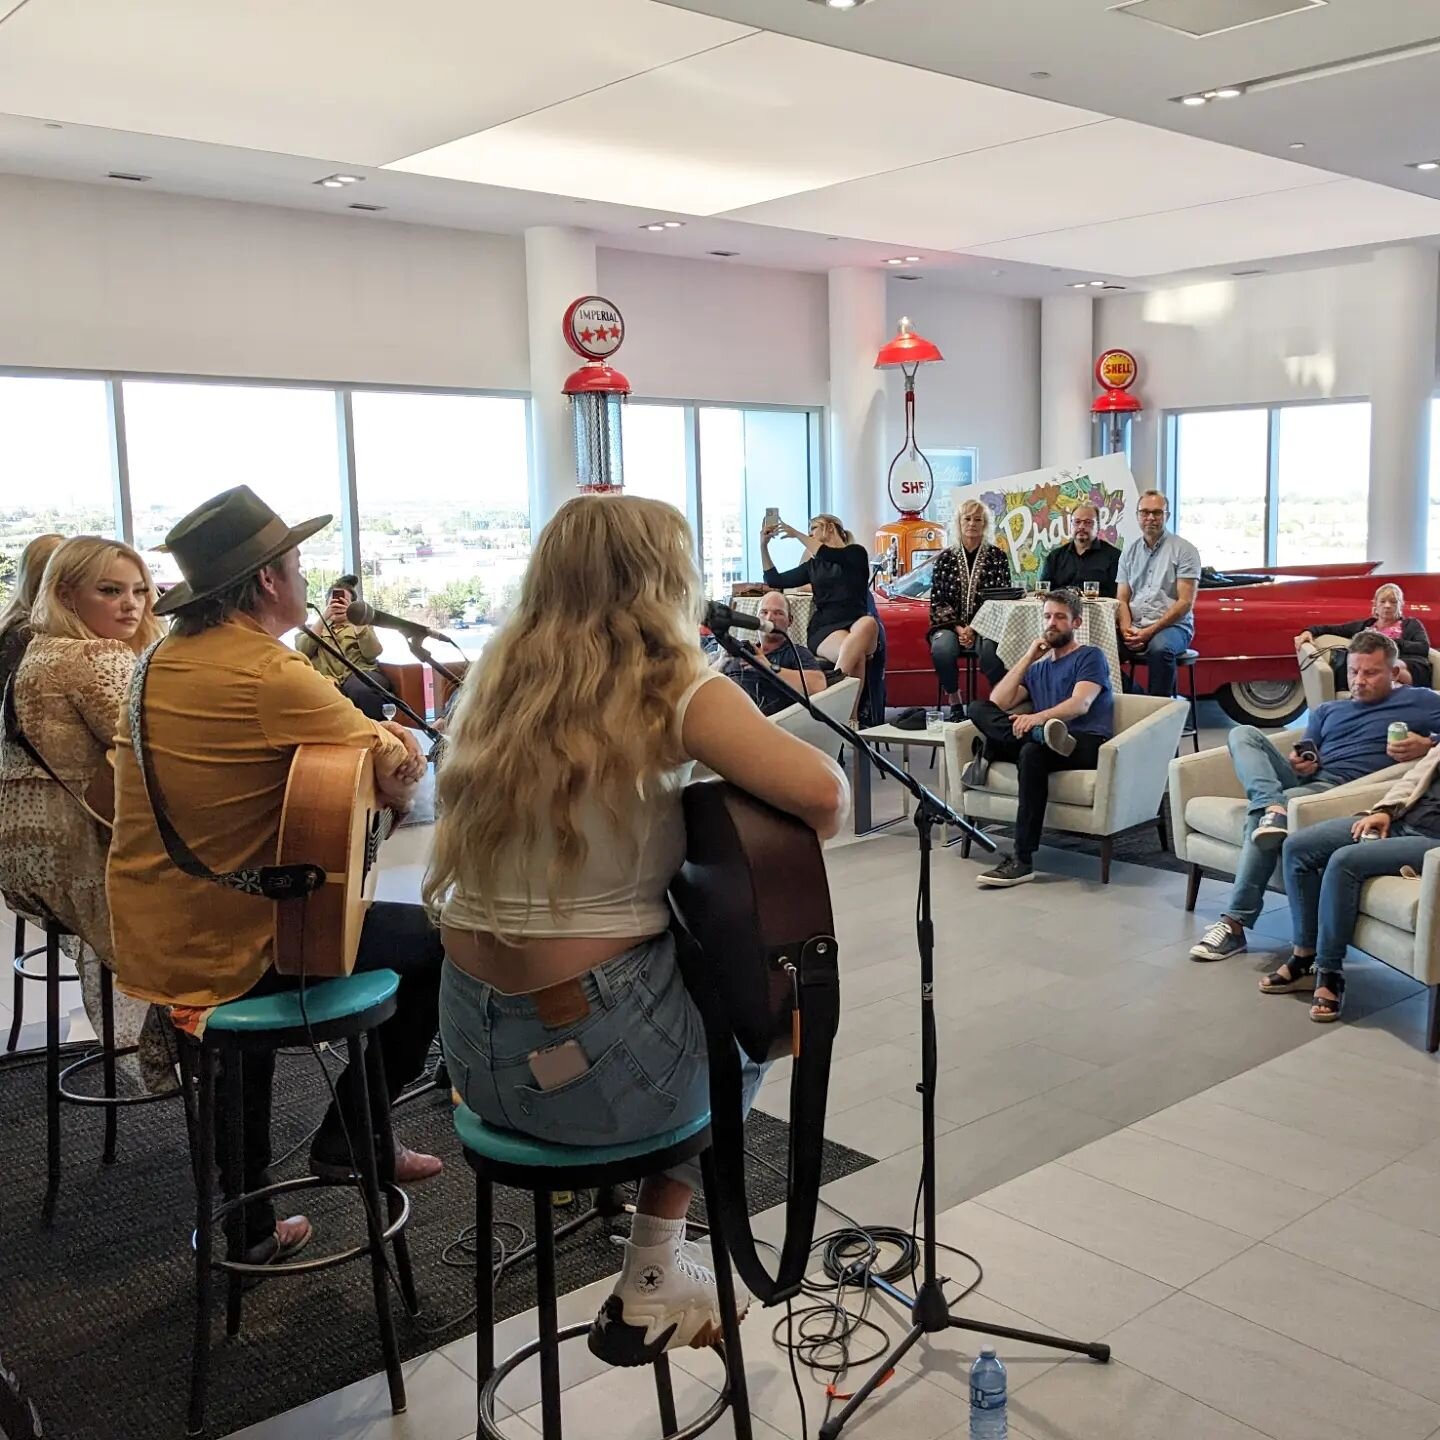 In addition to last week's evening sessions, we also had fantastic happy hour and afternoon sessions featuring a ton of the #bluejayfam and new (to us) talent too, especially the youth session hosted by @ryanrlindsay featuring @berlynbroadhead_, @pai